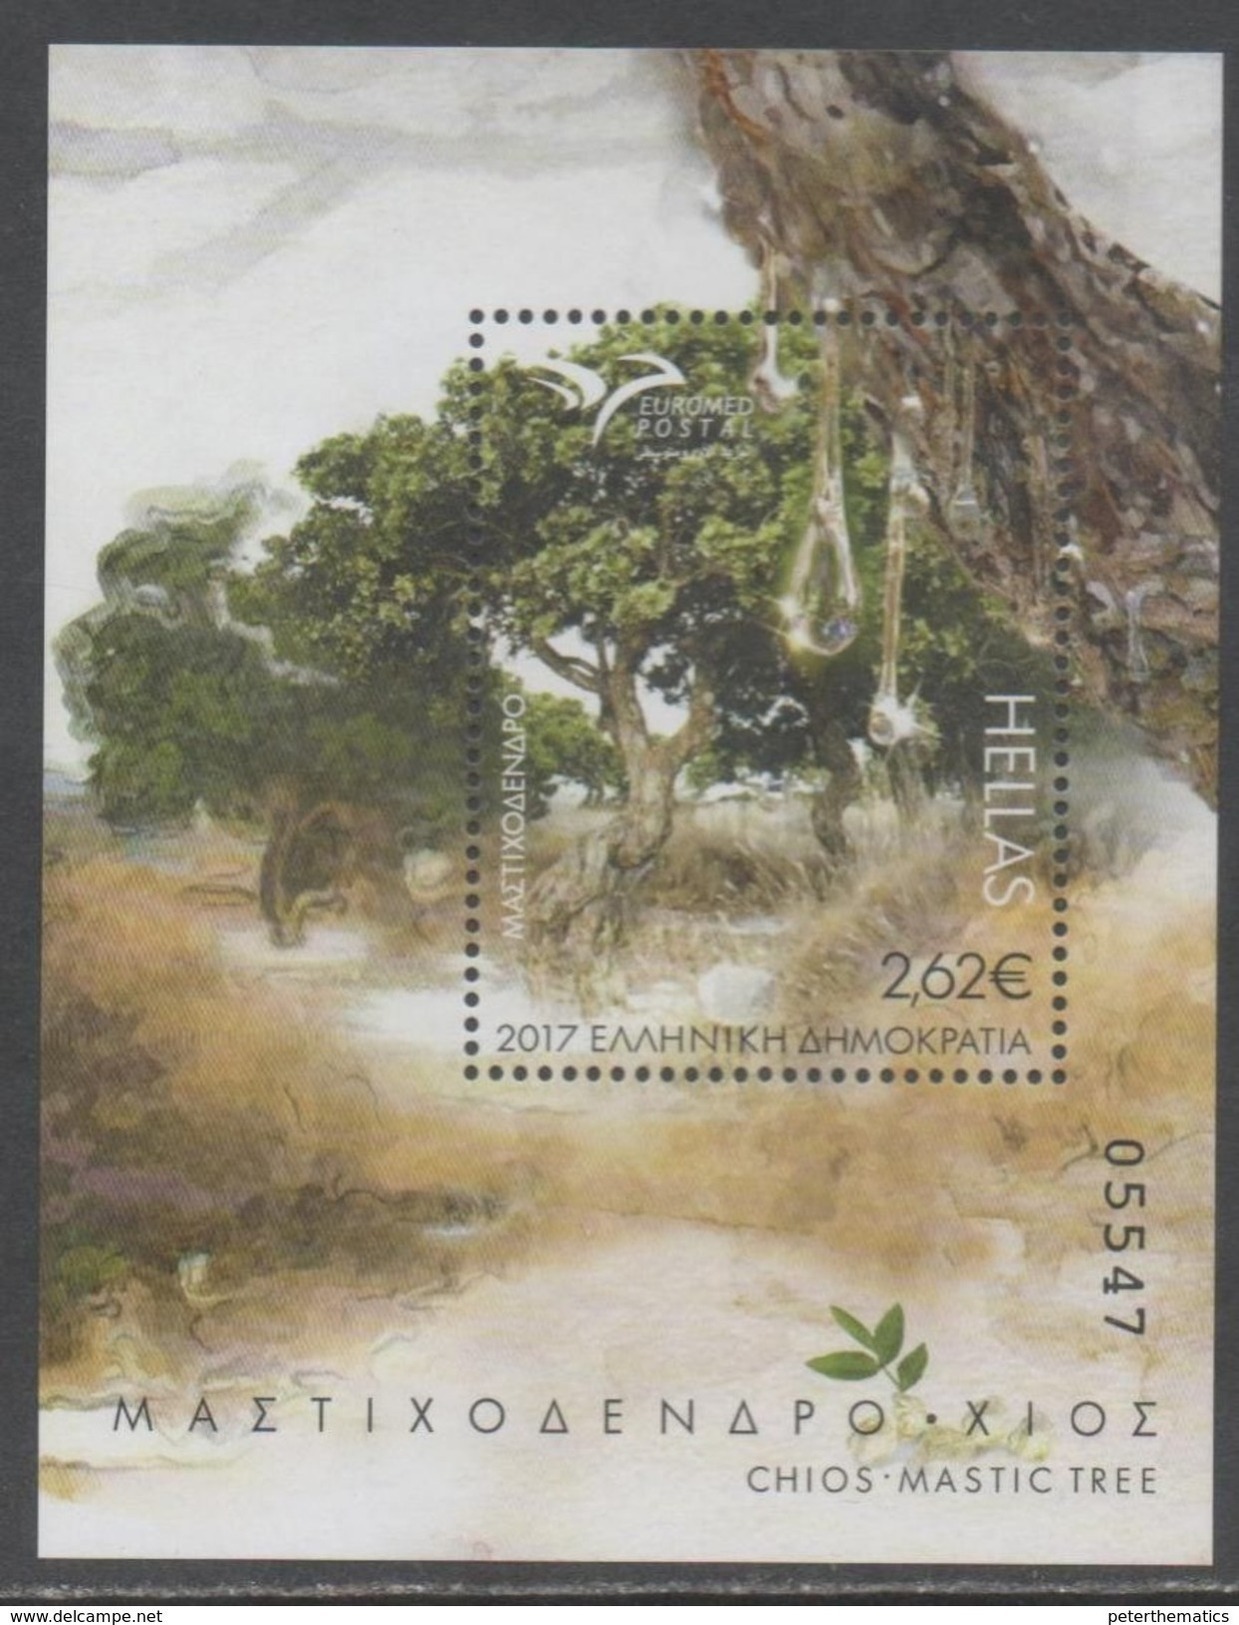 GREECE, 2017, MNH, JOINT ISSUE, EUROMED ,TREES, NUMBERED S/SHEET, LIMITED NUMBER PRODUCED - Trees